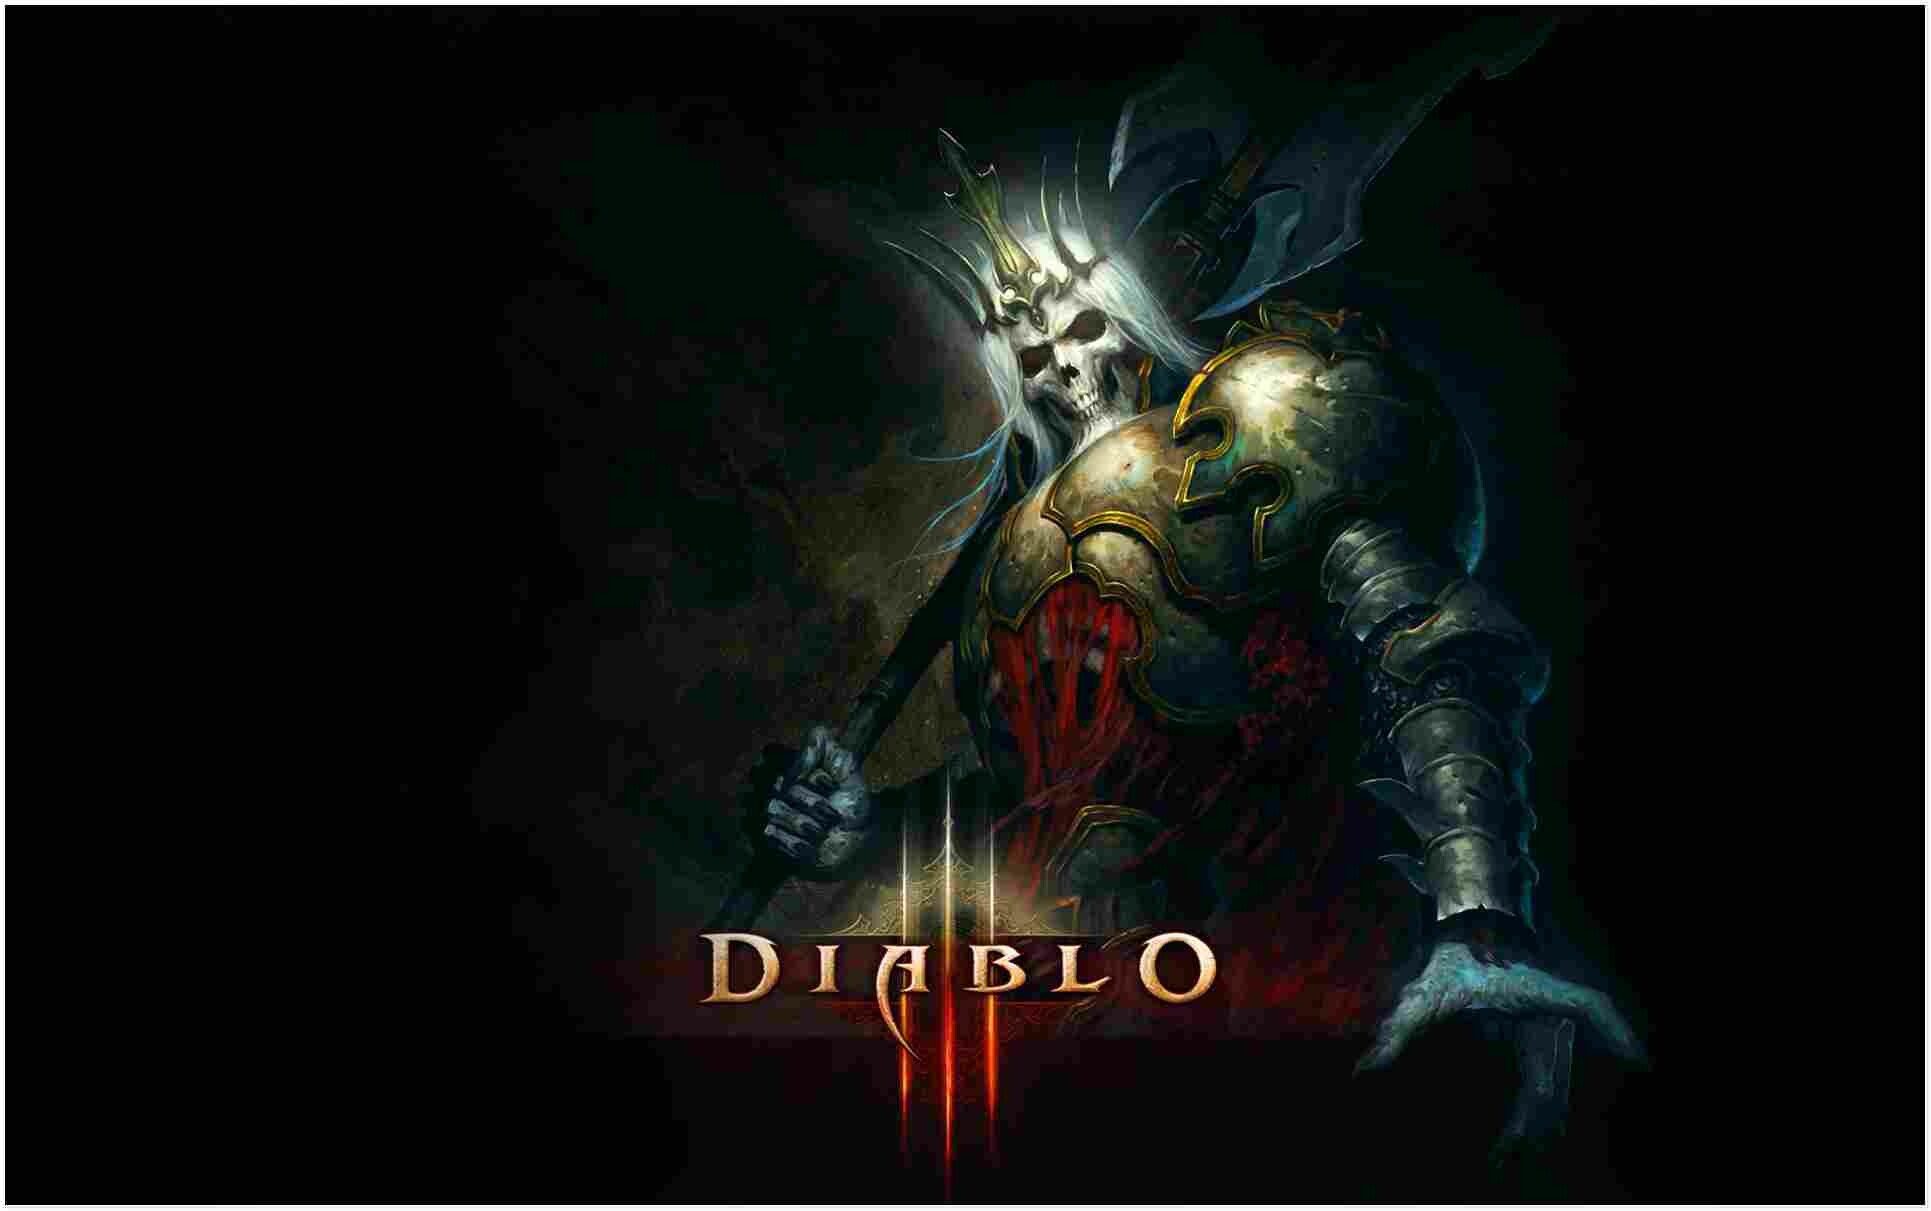 Diablo: As a video game series that developed around point-and-click gameplay mechanics, the mouse is traditionally used for moving and using abilities in PC versions of video games. 1940x1220 HD Wallpaper.